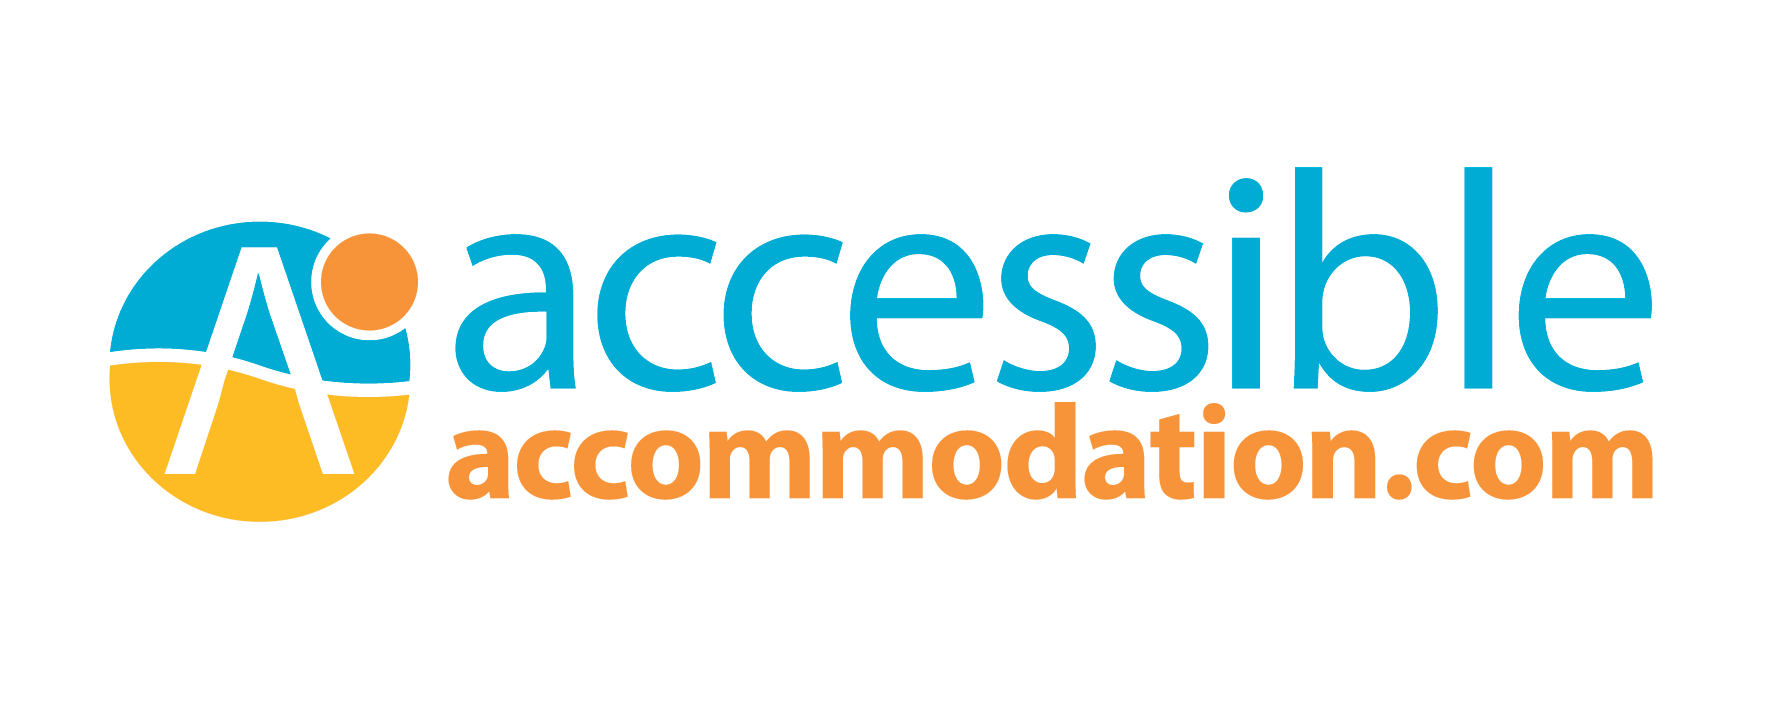 Accessible Accommodation - Villas Apartments Hotels and More For the Costa Blanca and the World